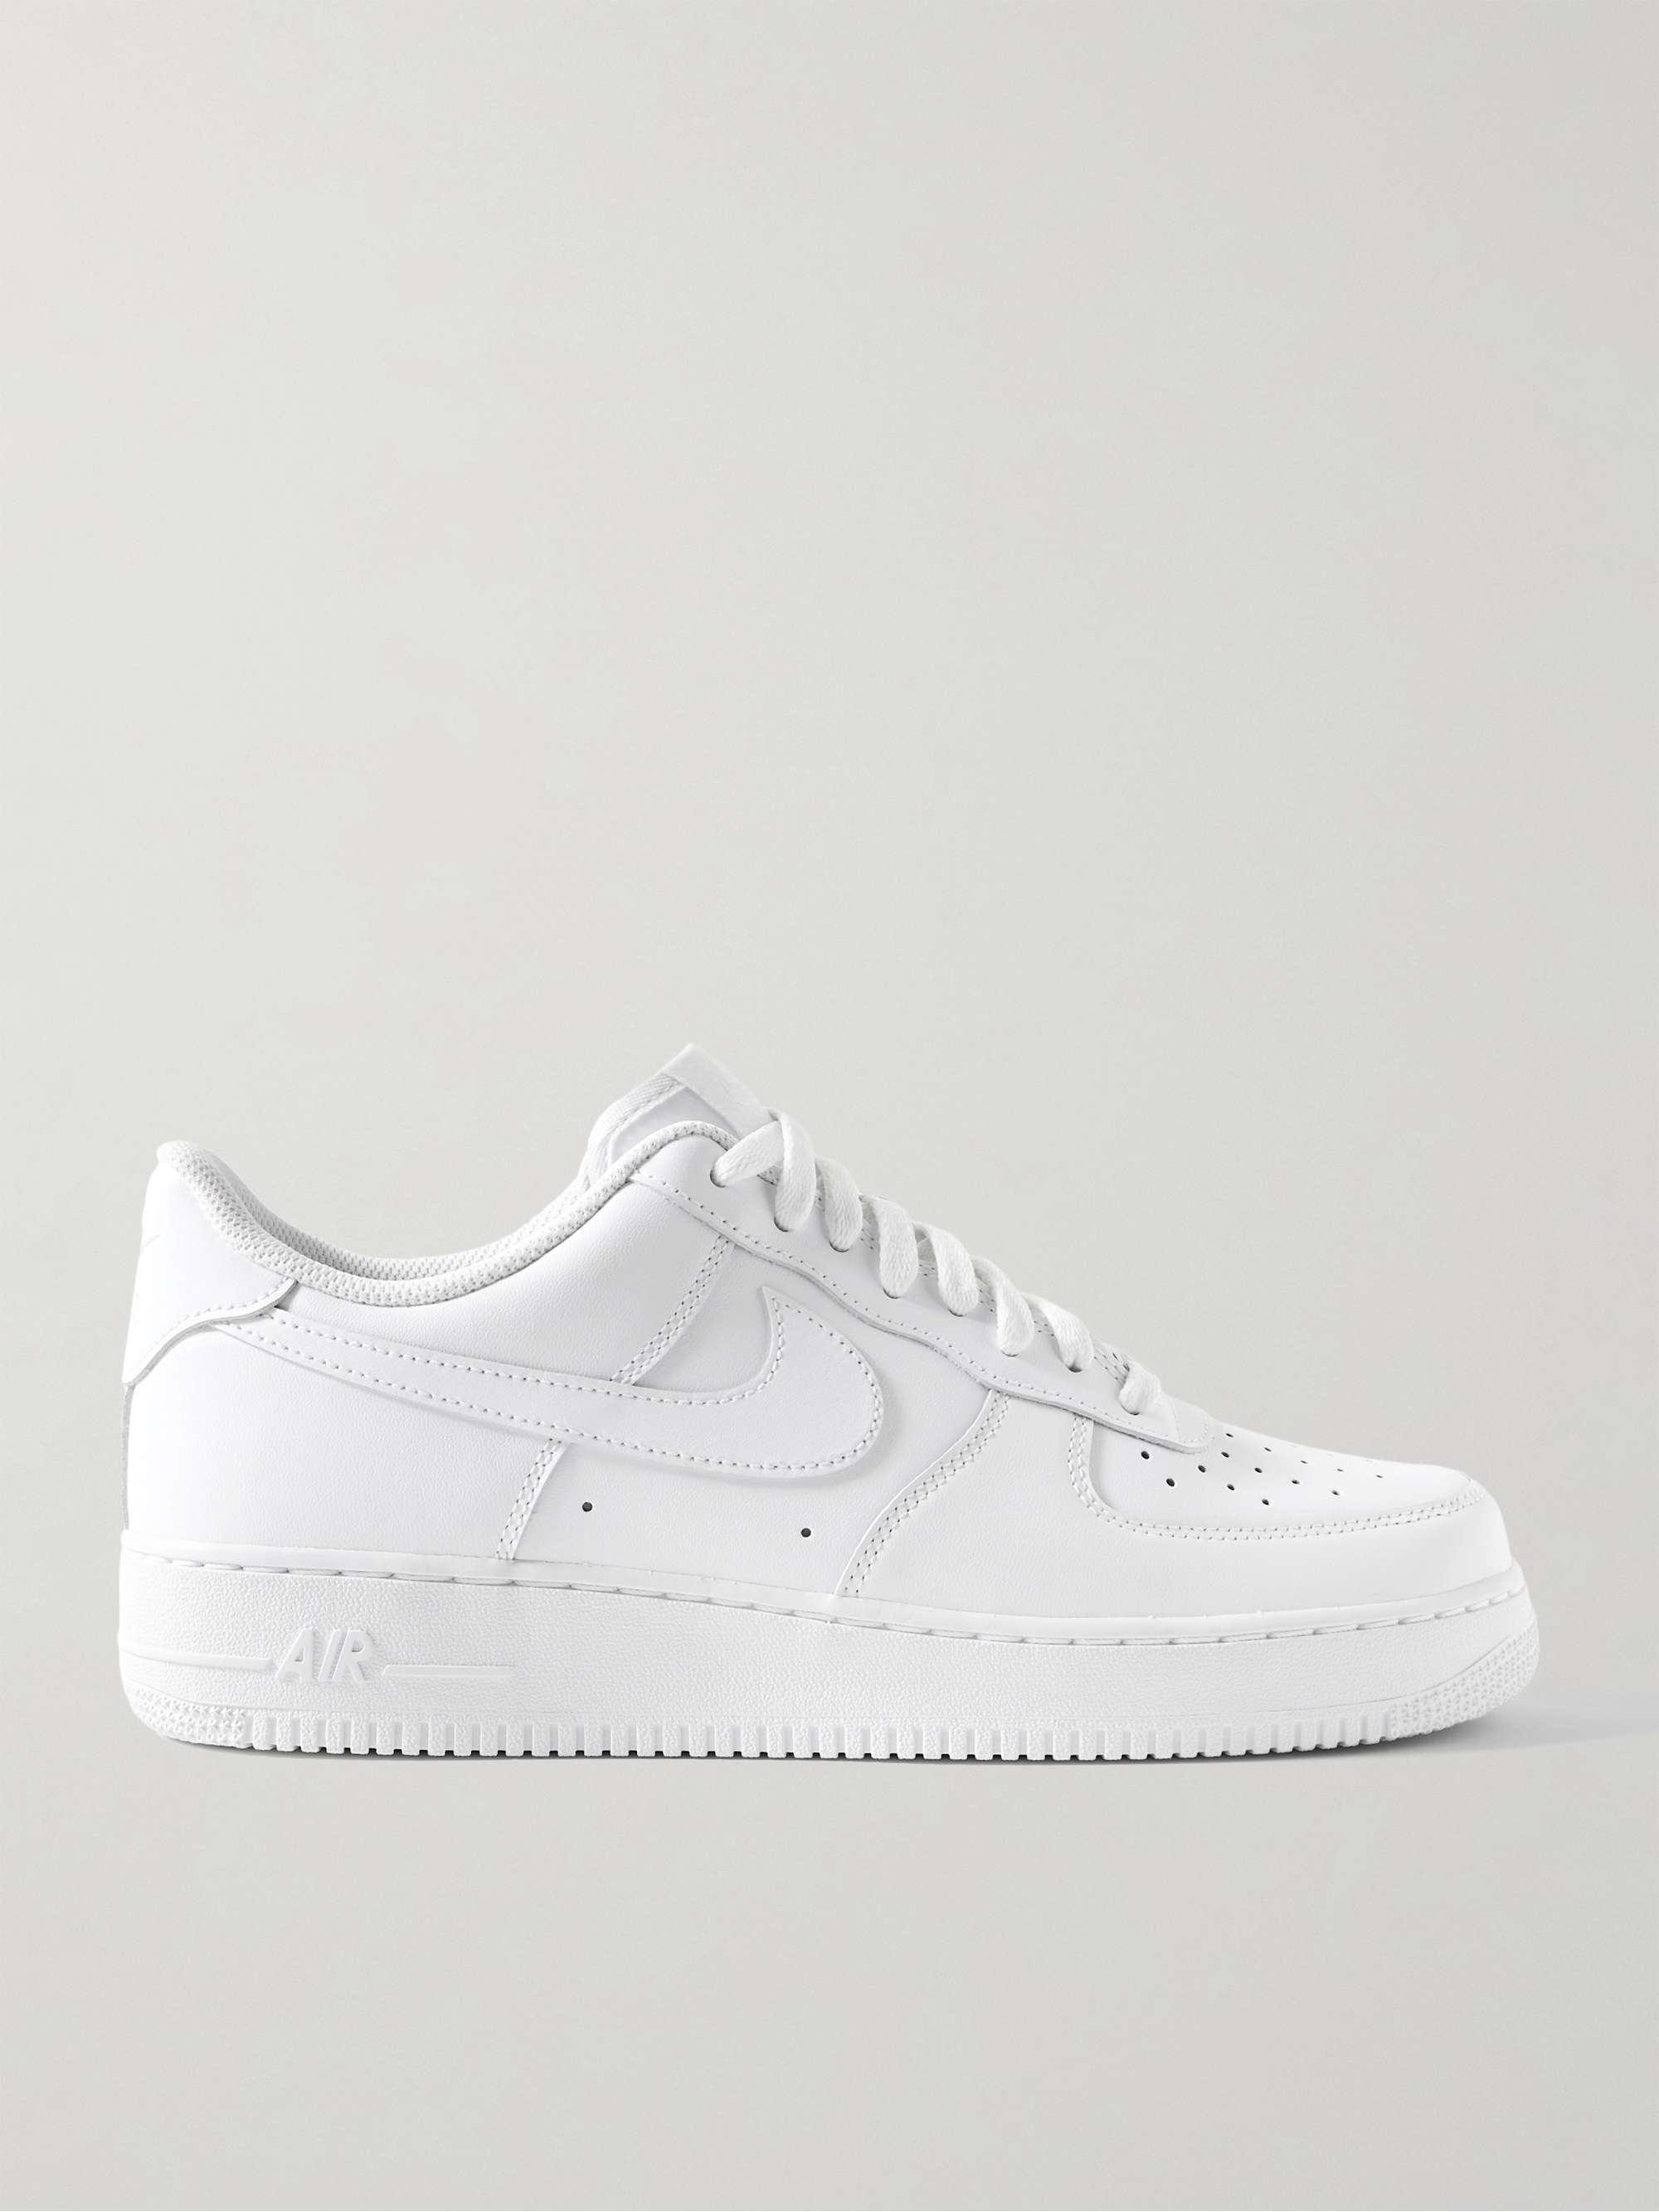 White Air Force 1 '07 Leather Sneakers | NIKE | MR PORTER